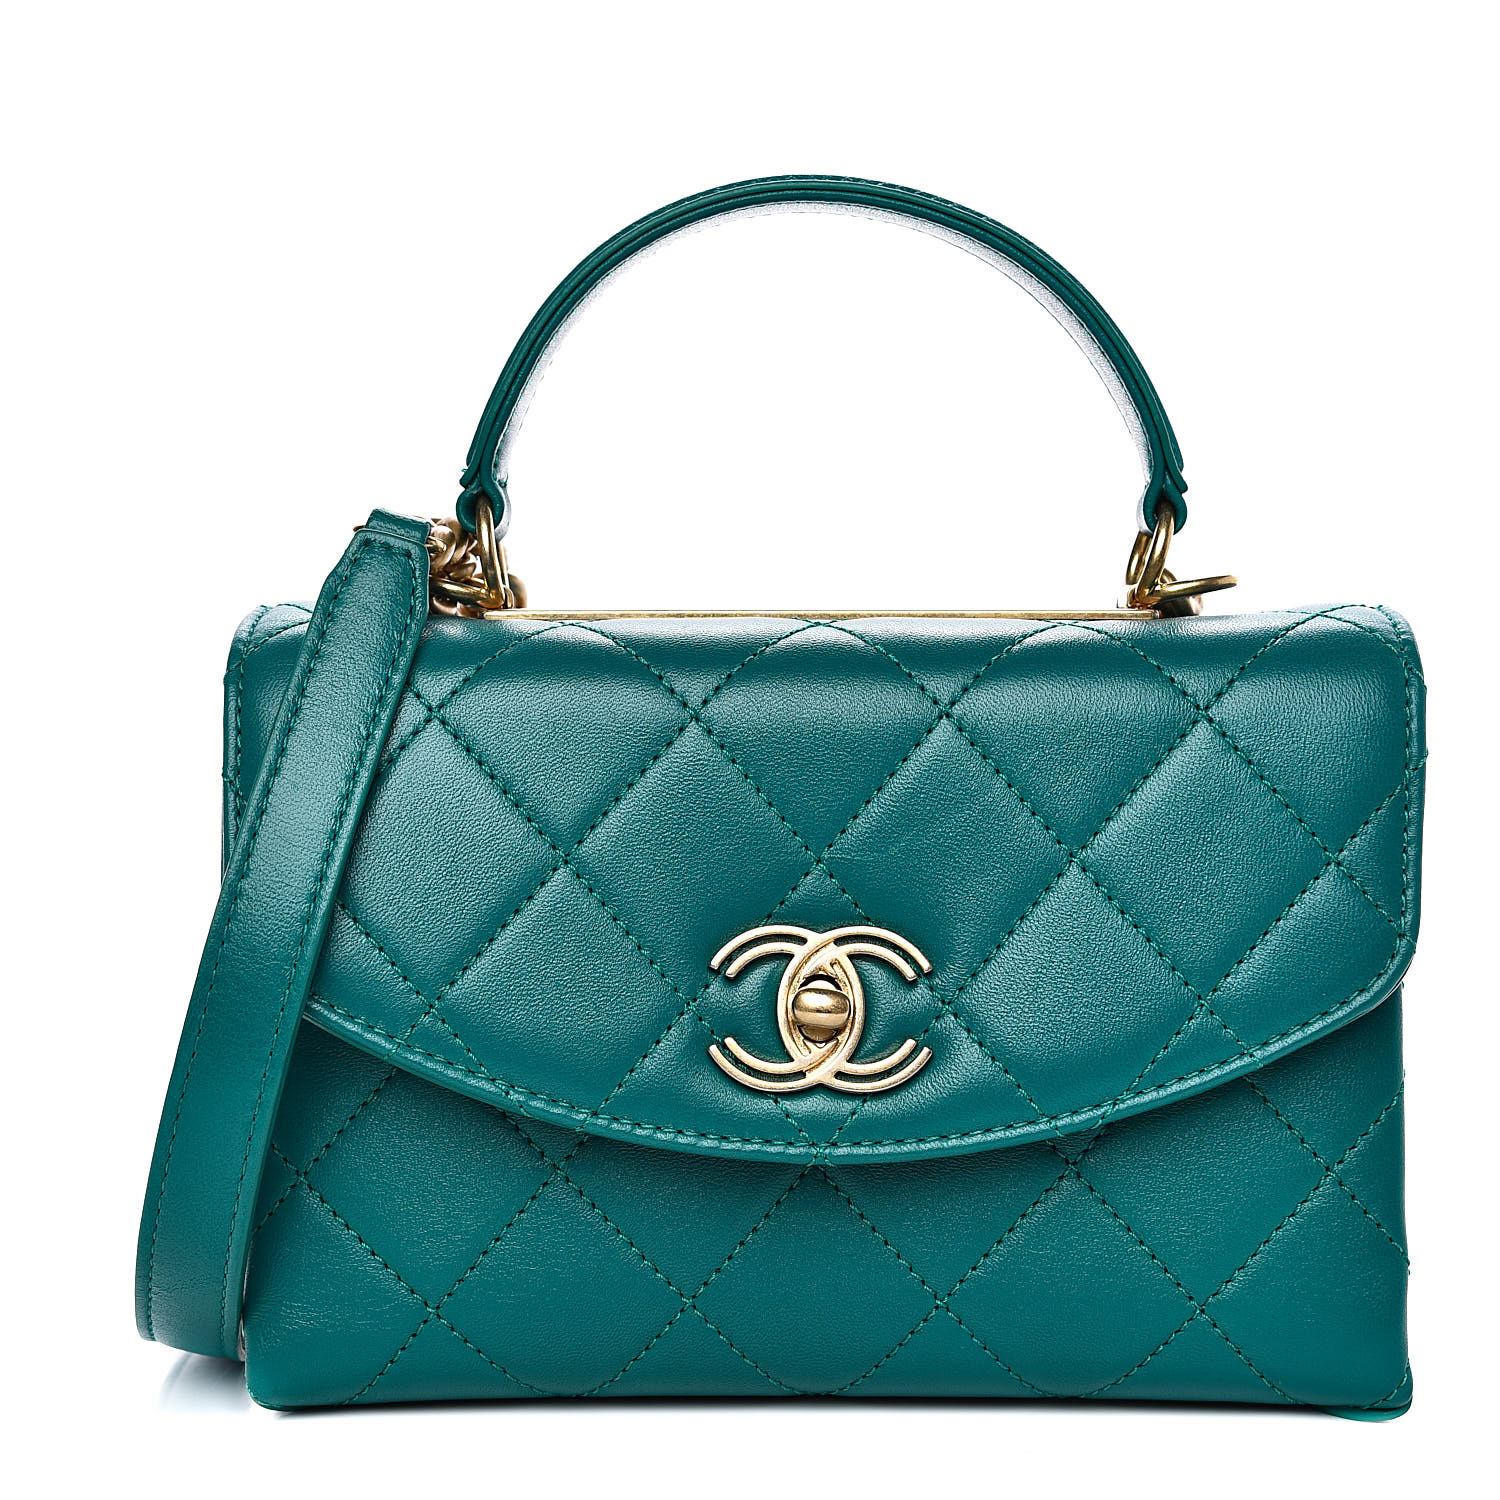 CHANEL Lambskin Quilted Small Top Handle Bag Turquoise 533349